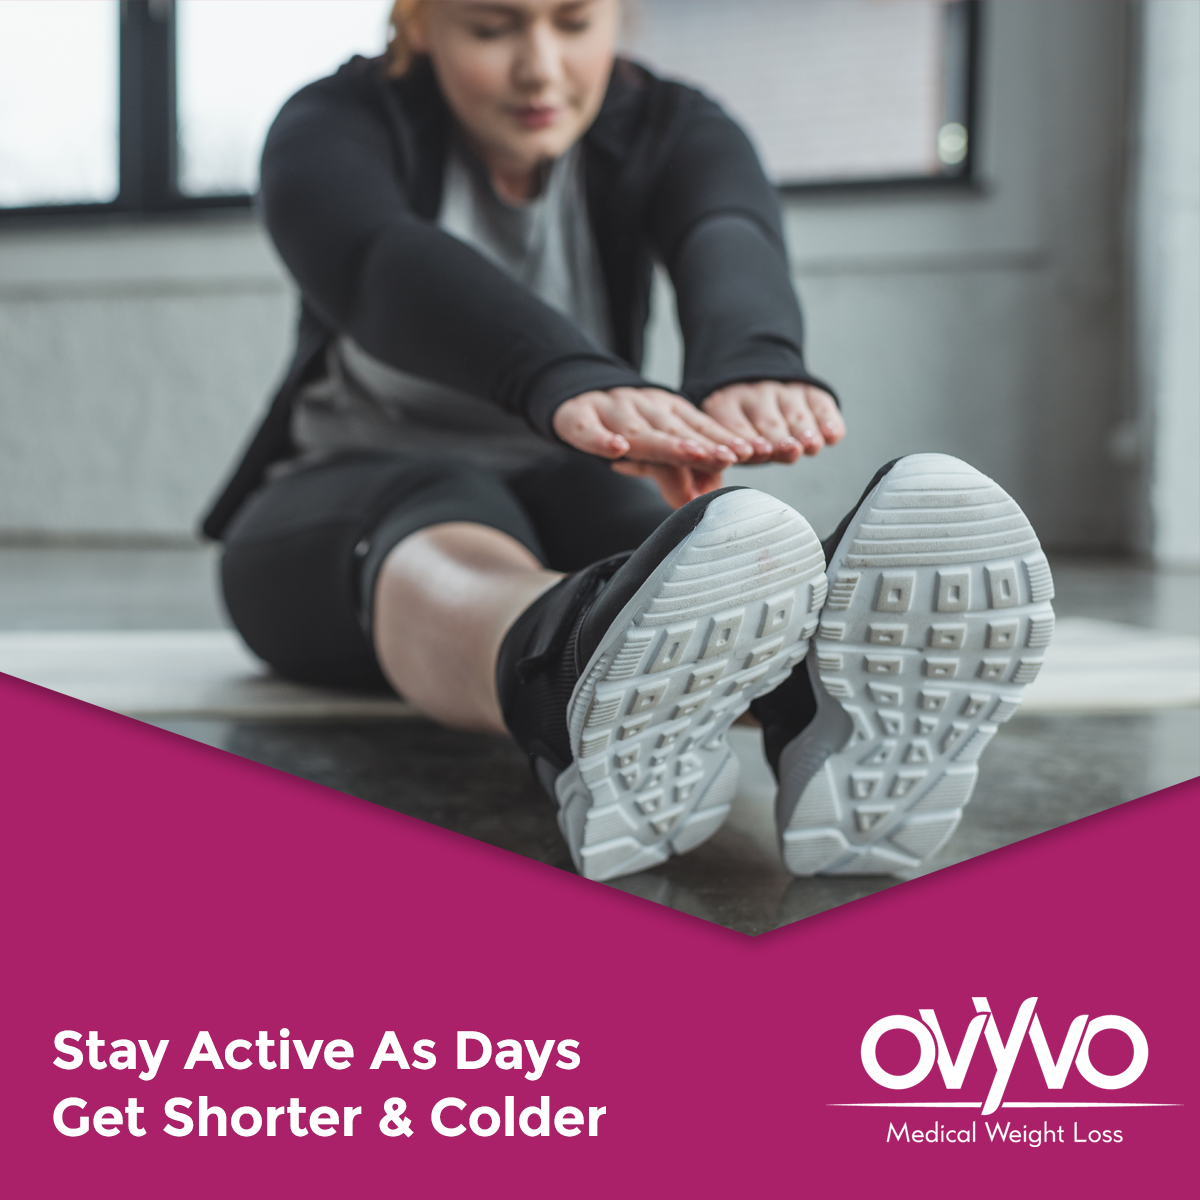 12 Tips For Staying Active As Days Get Shorter & Colder